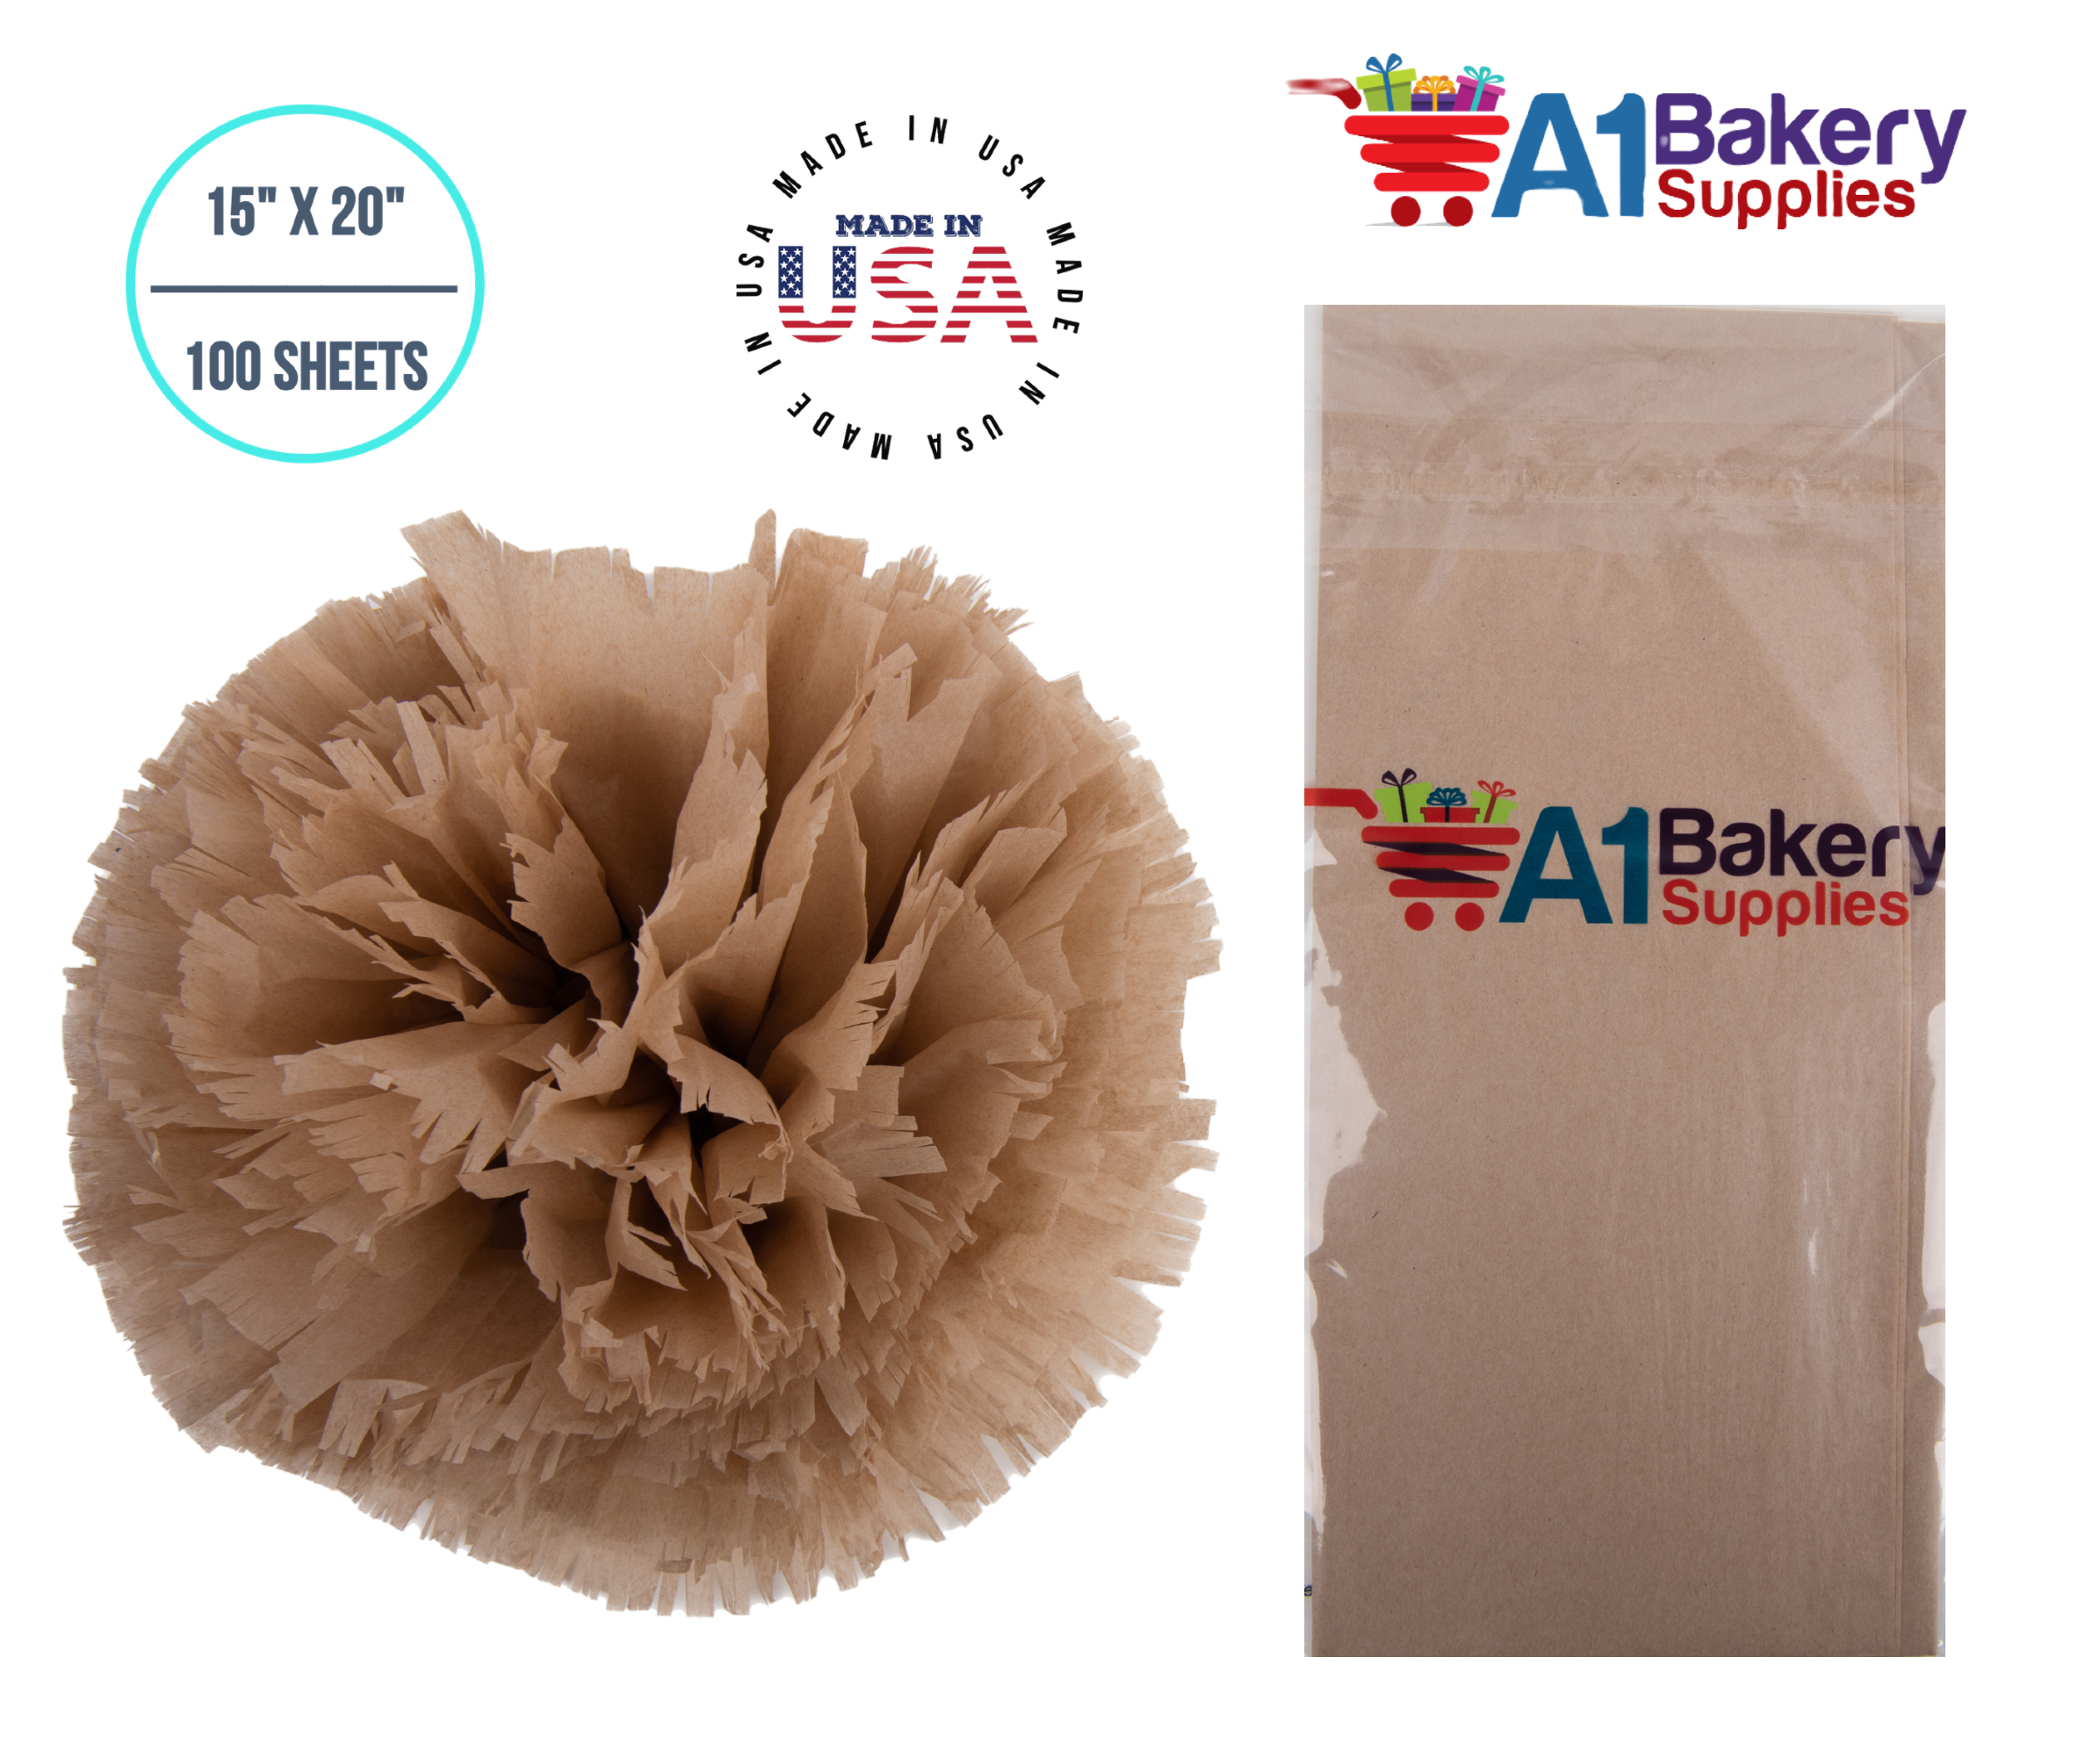 A1bakerysupplies High Quality Gift Wrap Color Tissue Paper - Preimum Quality Paper Made in USA 15 x 20 Inches - 100 Sheets per Pack (Solid Kraft)